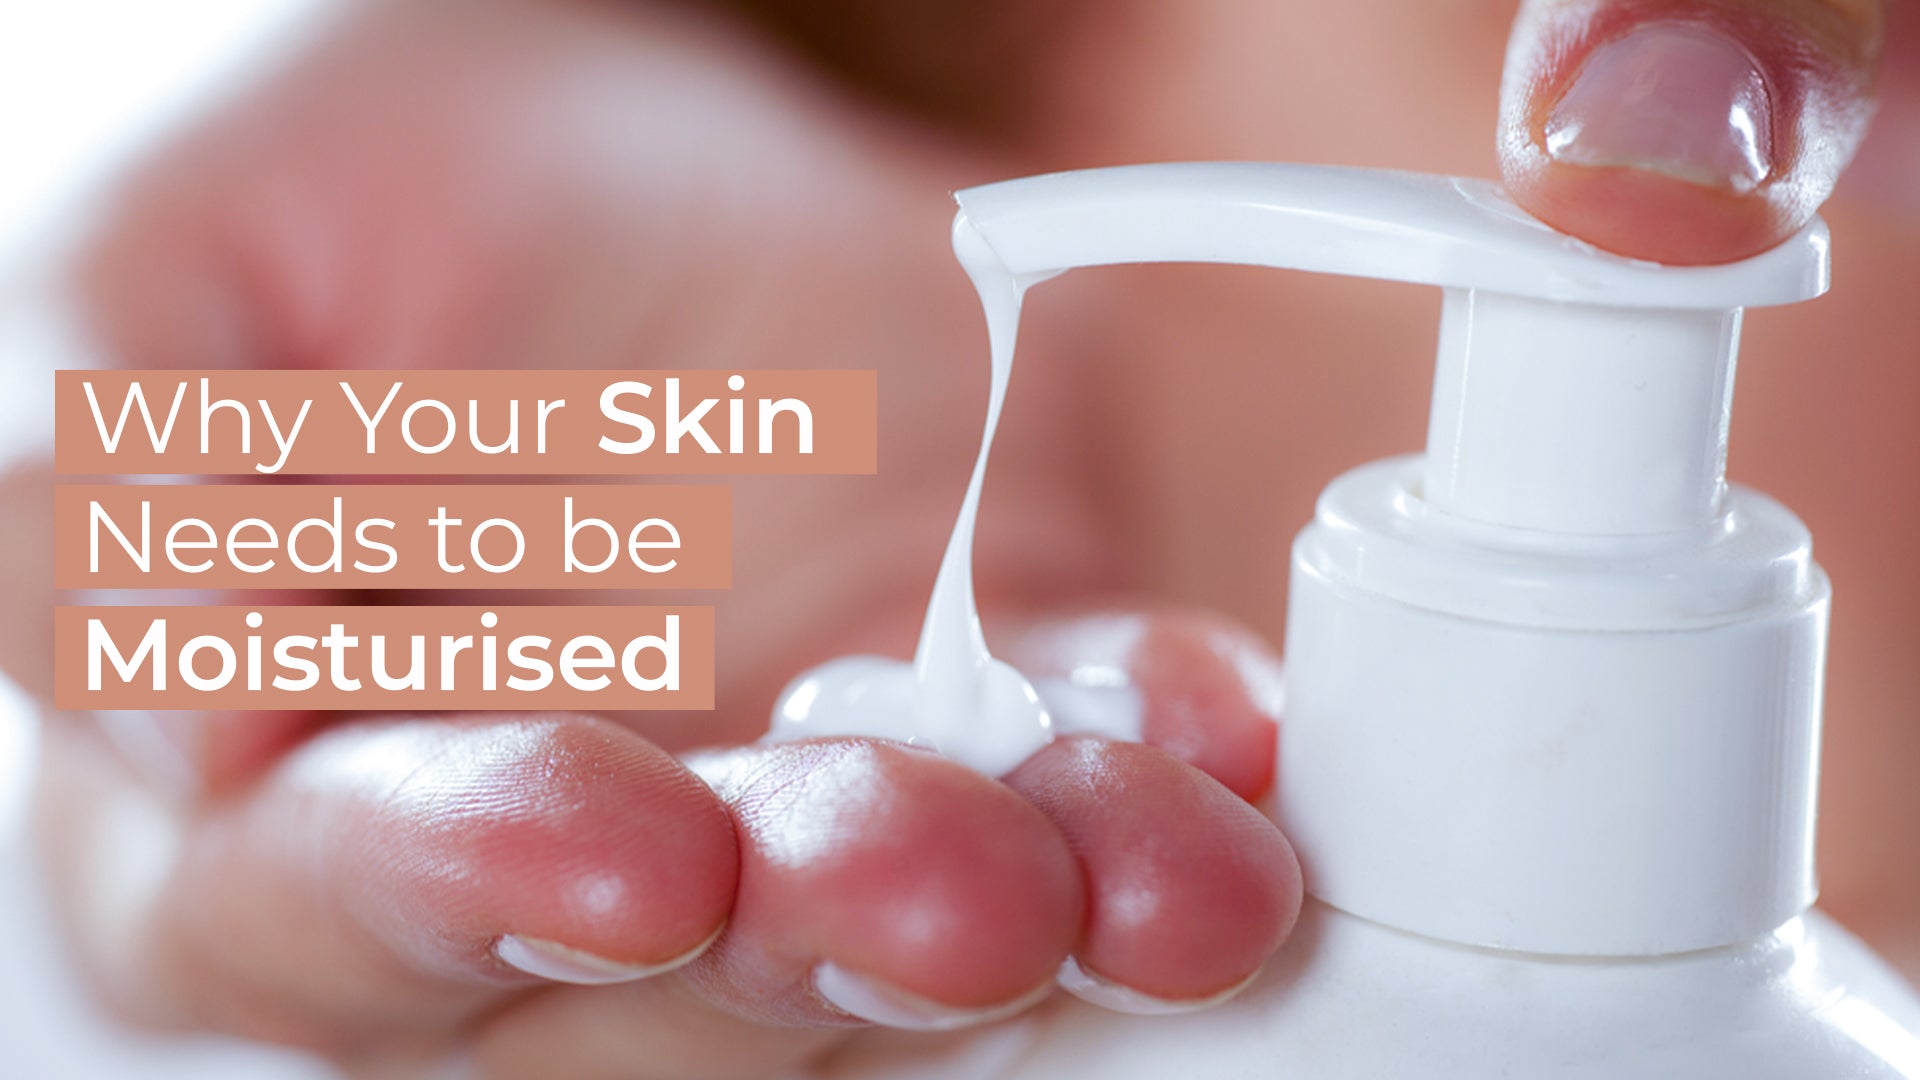 Reasons why your skin needs to be moisturised